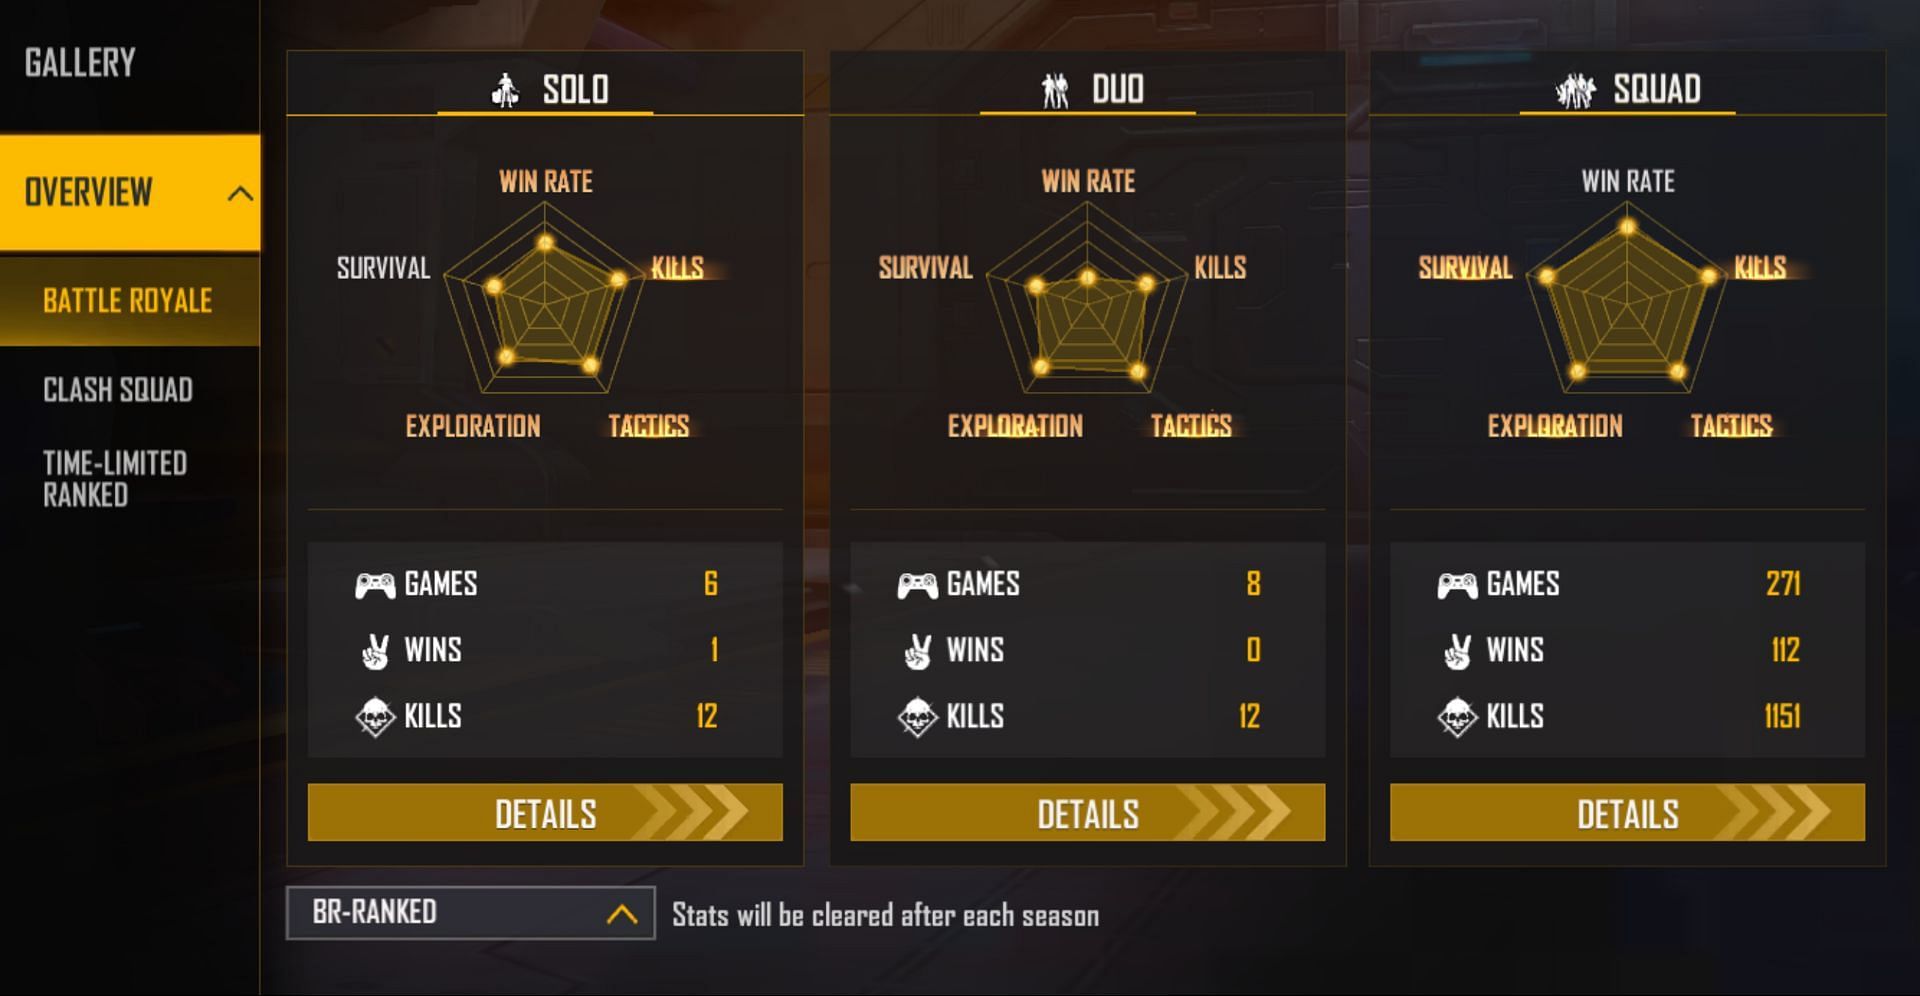 Jonty Gaming has played squad games the most (Image via Garena)